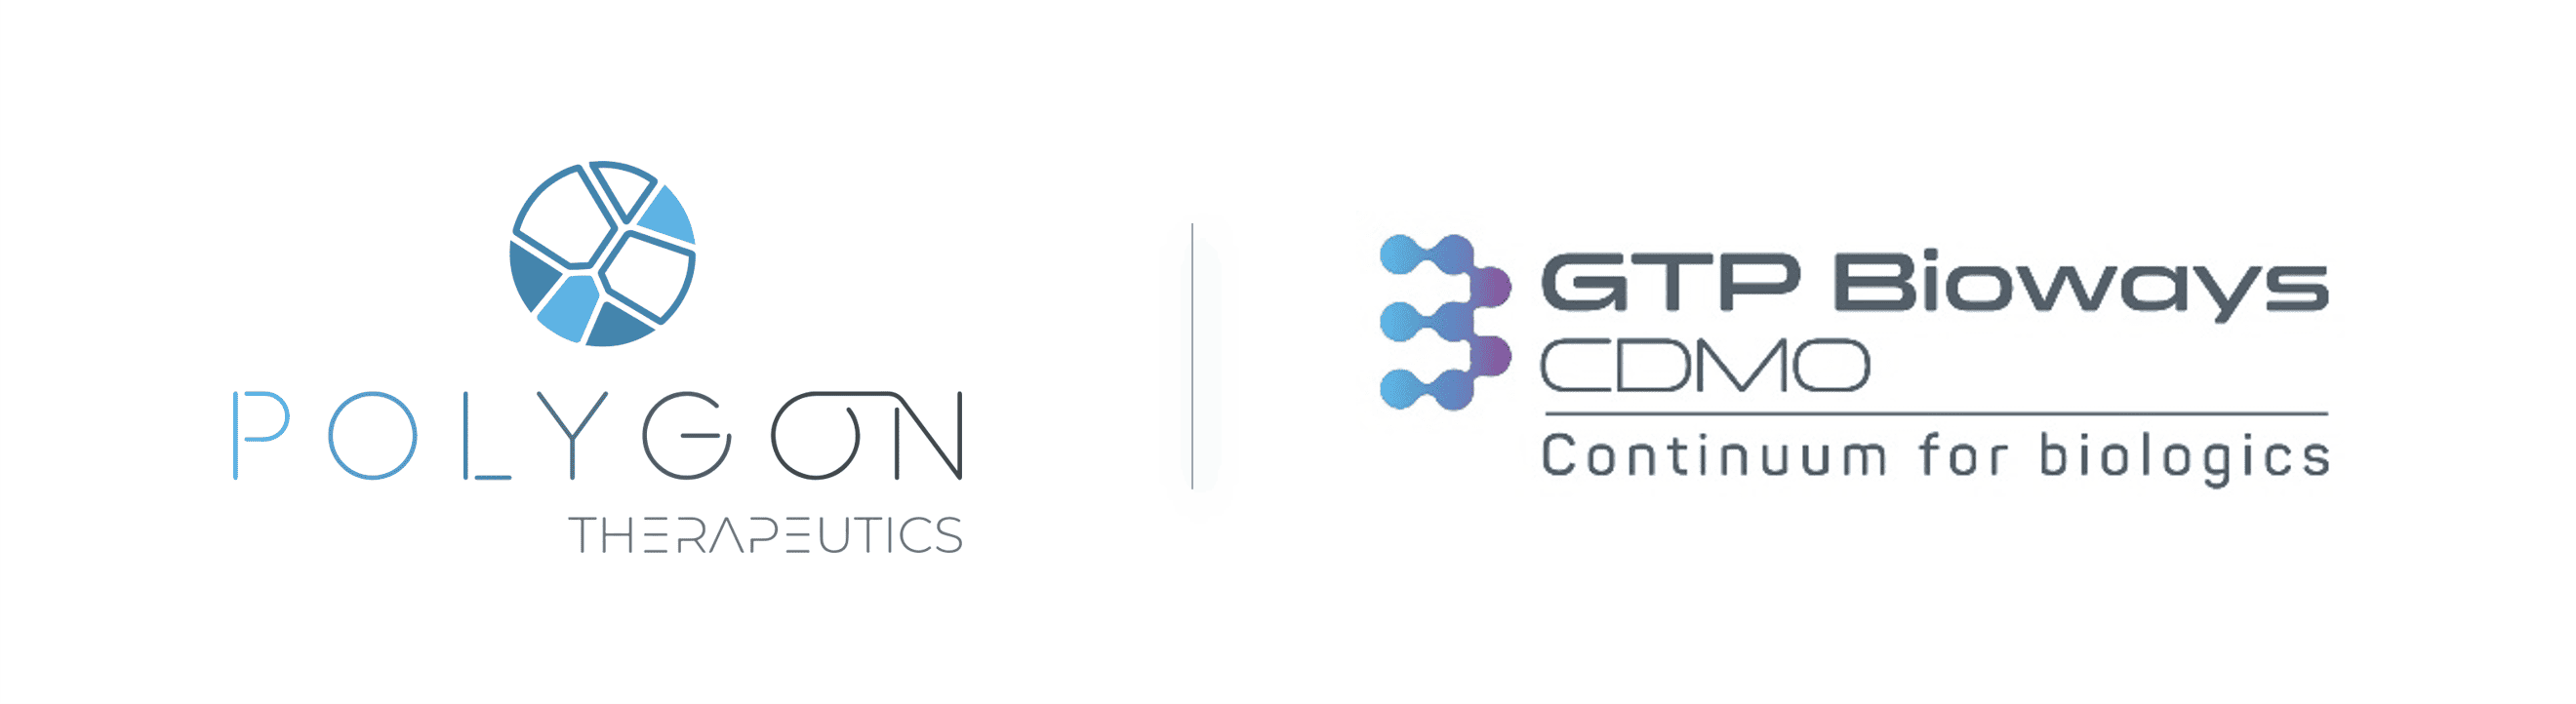 Polygon Therapeutics and GTP Bioways collaborates for cell line development